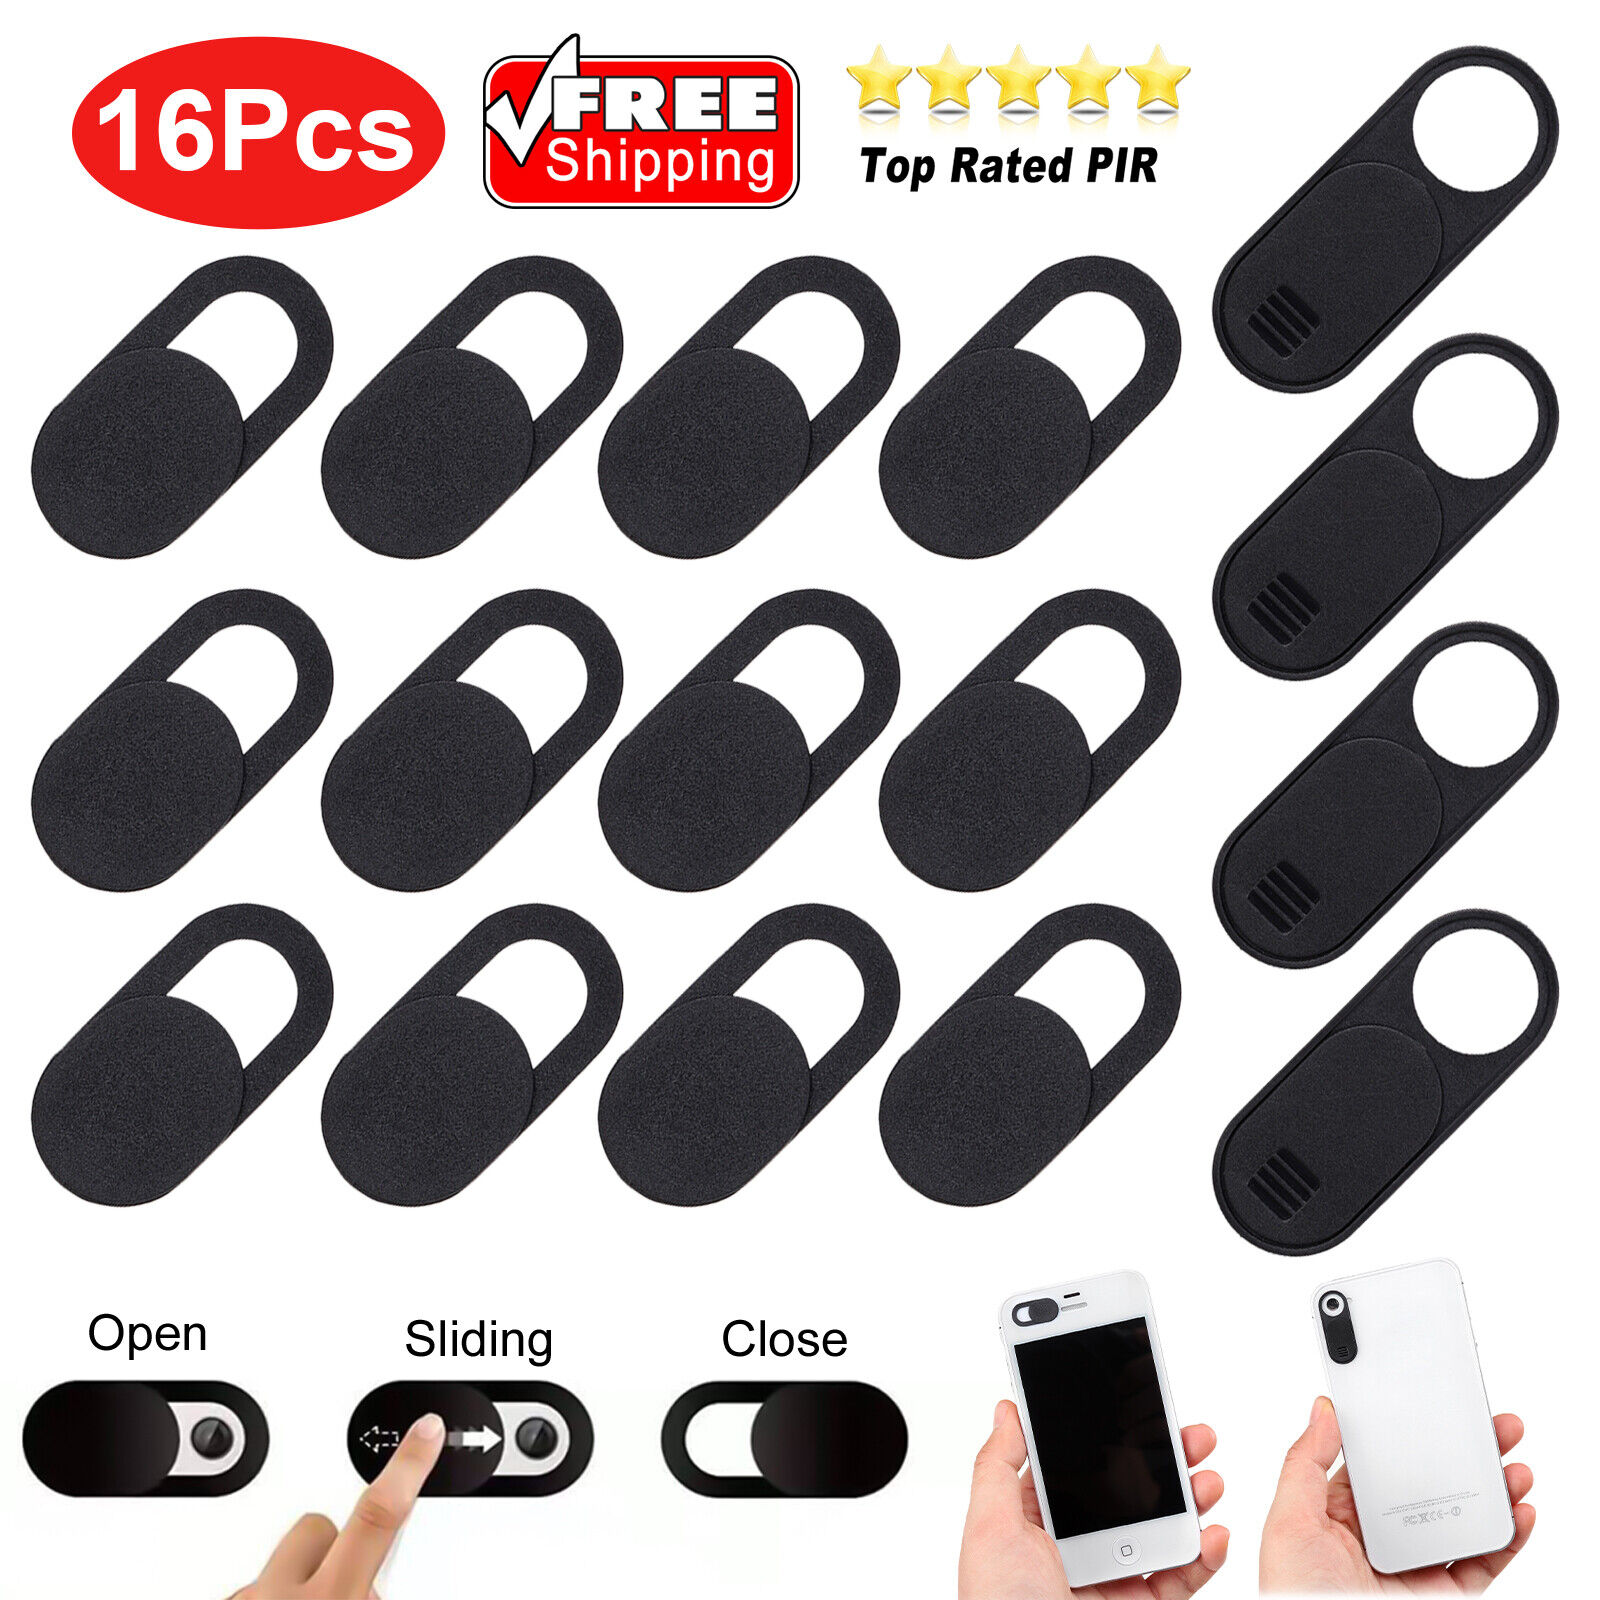 16X WebCam Cover Slide Camera Privacy Security Protect Sticker For Phone Laptop